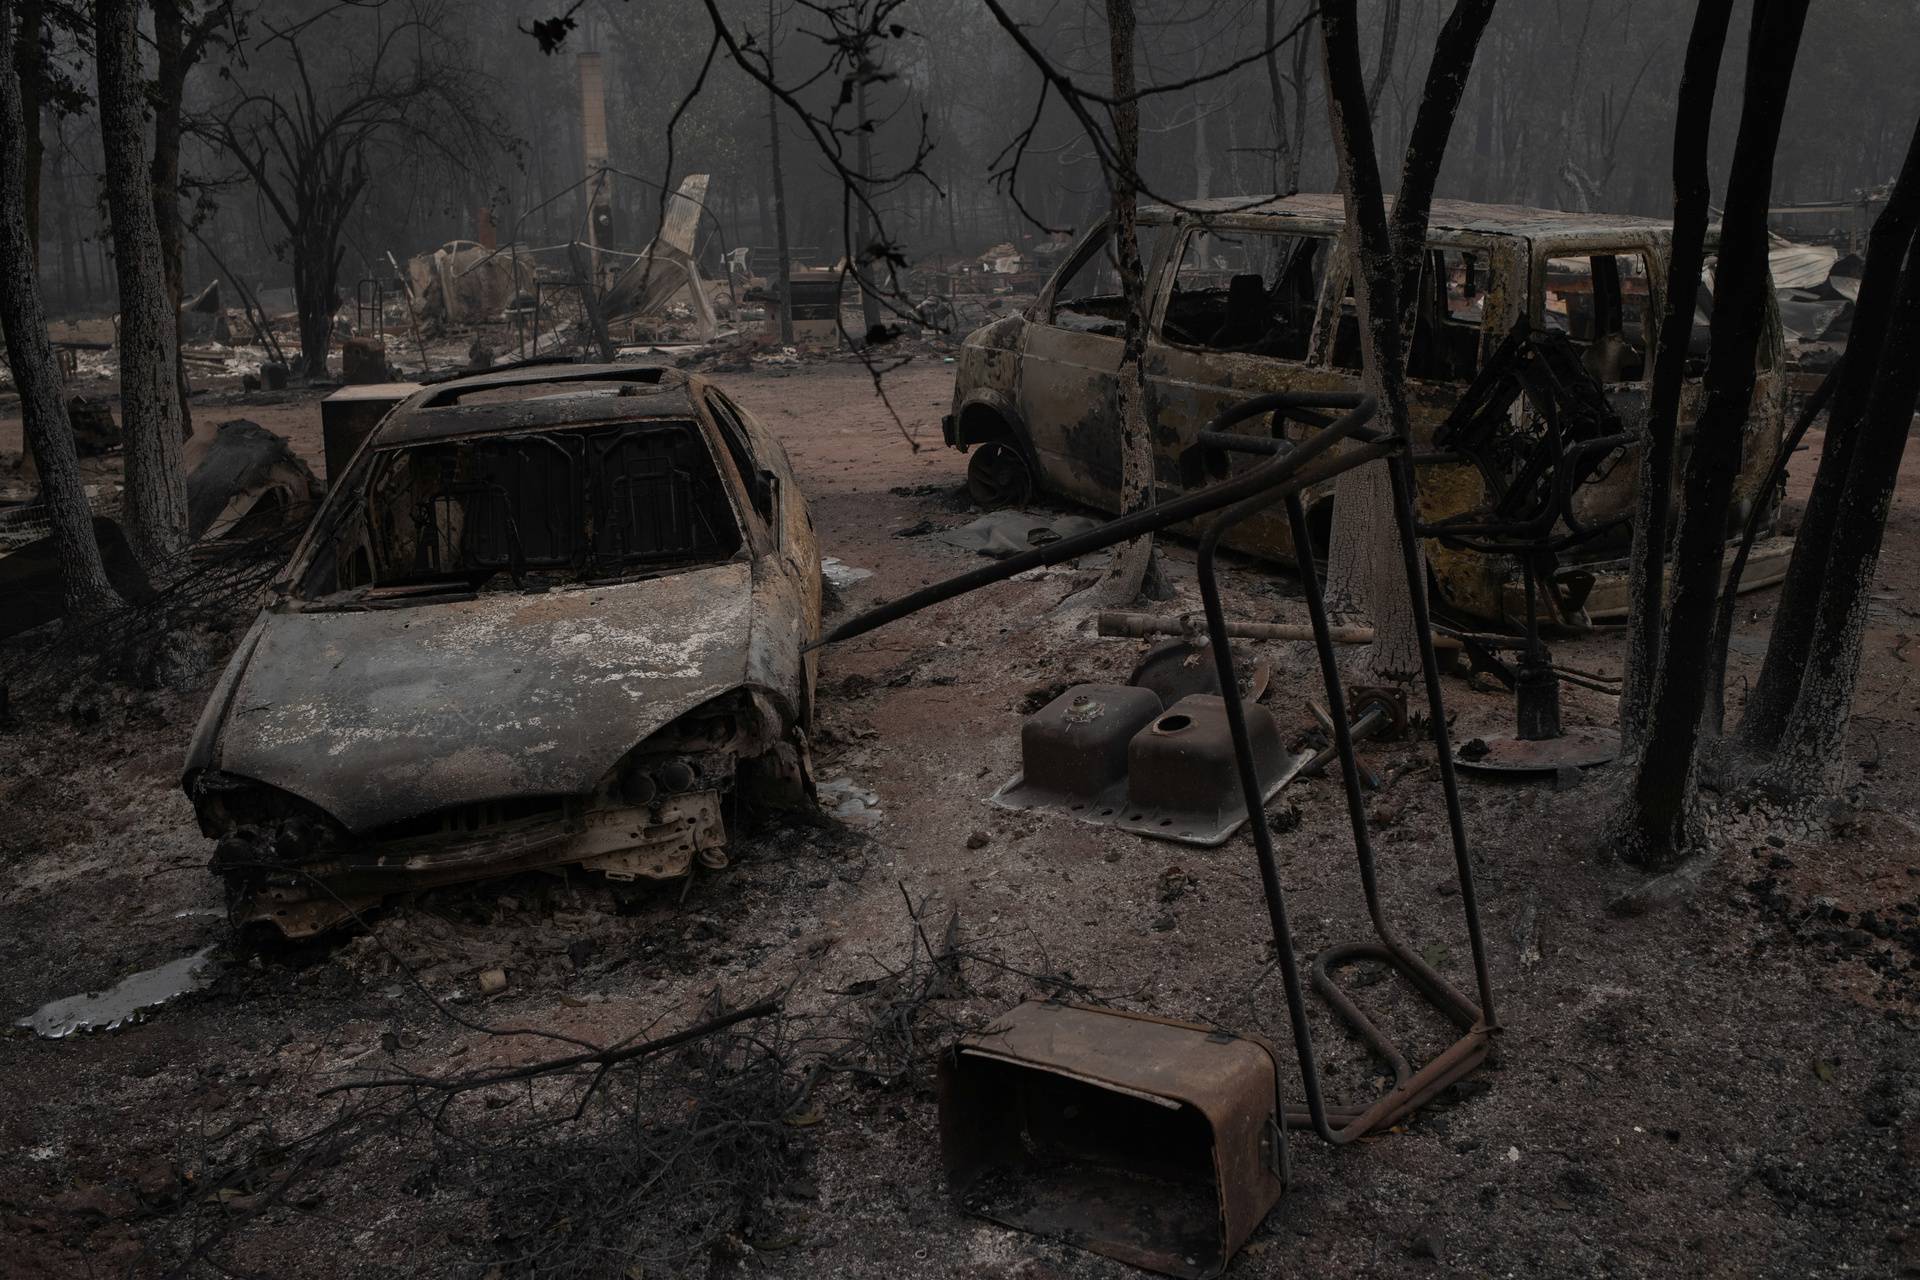 Vehicles lie damaged in the aftermath of the Obenchain Fire in Eagle Point, Oregon